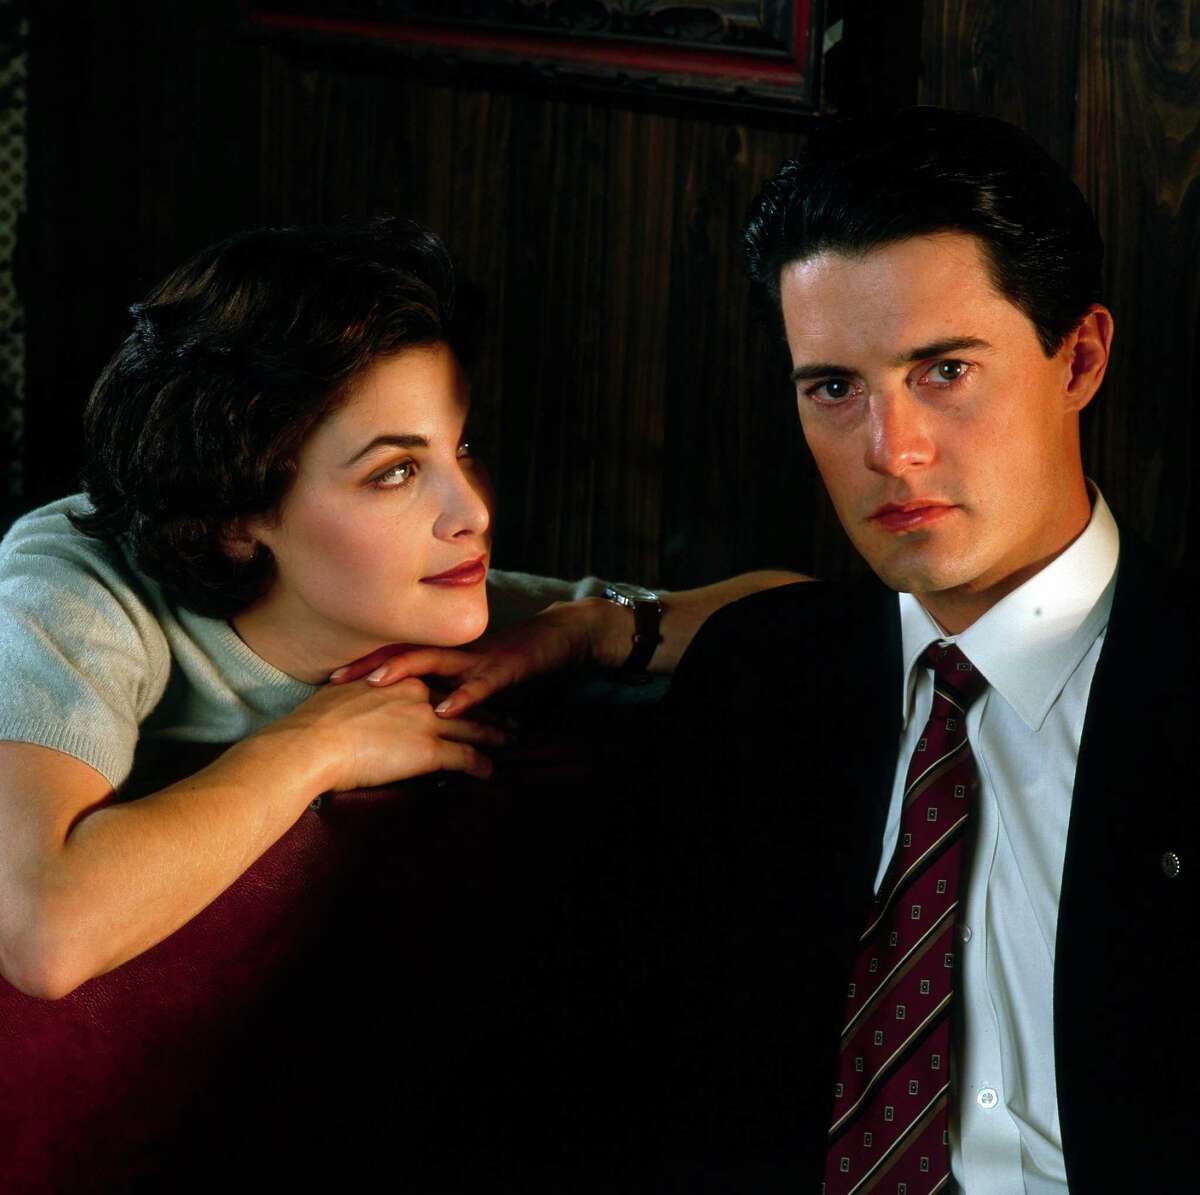 "Twin Peaks" was a pioneer in eerie, surreal TV and developed a devoted following soon after it debuted on April 8, 1990. Here's a look at where in Washington the show was filmed, and what the original cast is up to now. Pictured are Sherilyn Fenn and Kyle MacLachlan. 